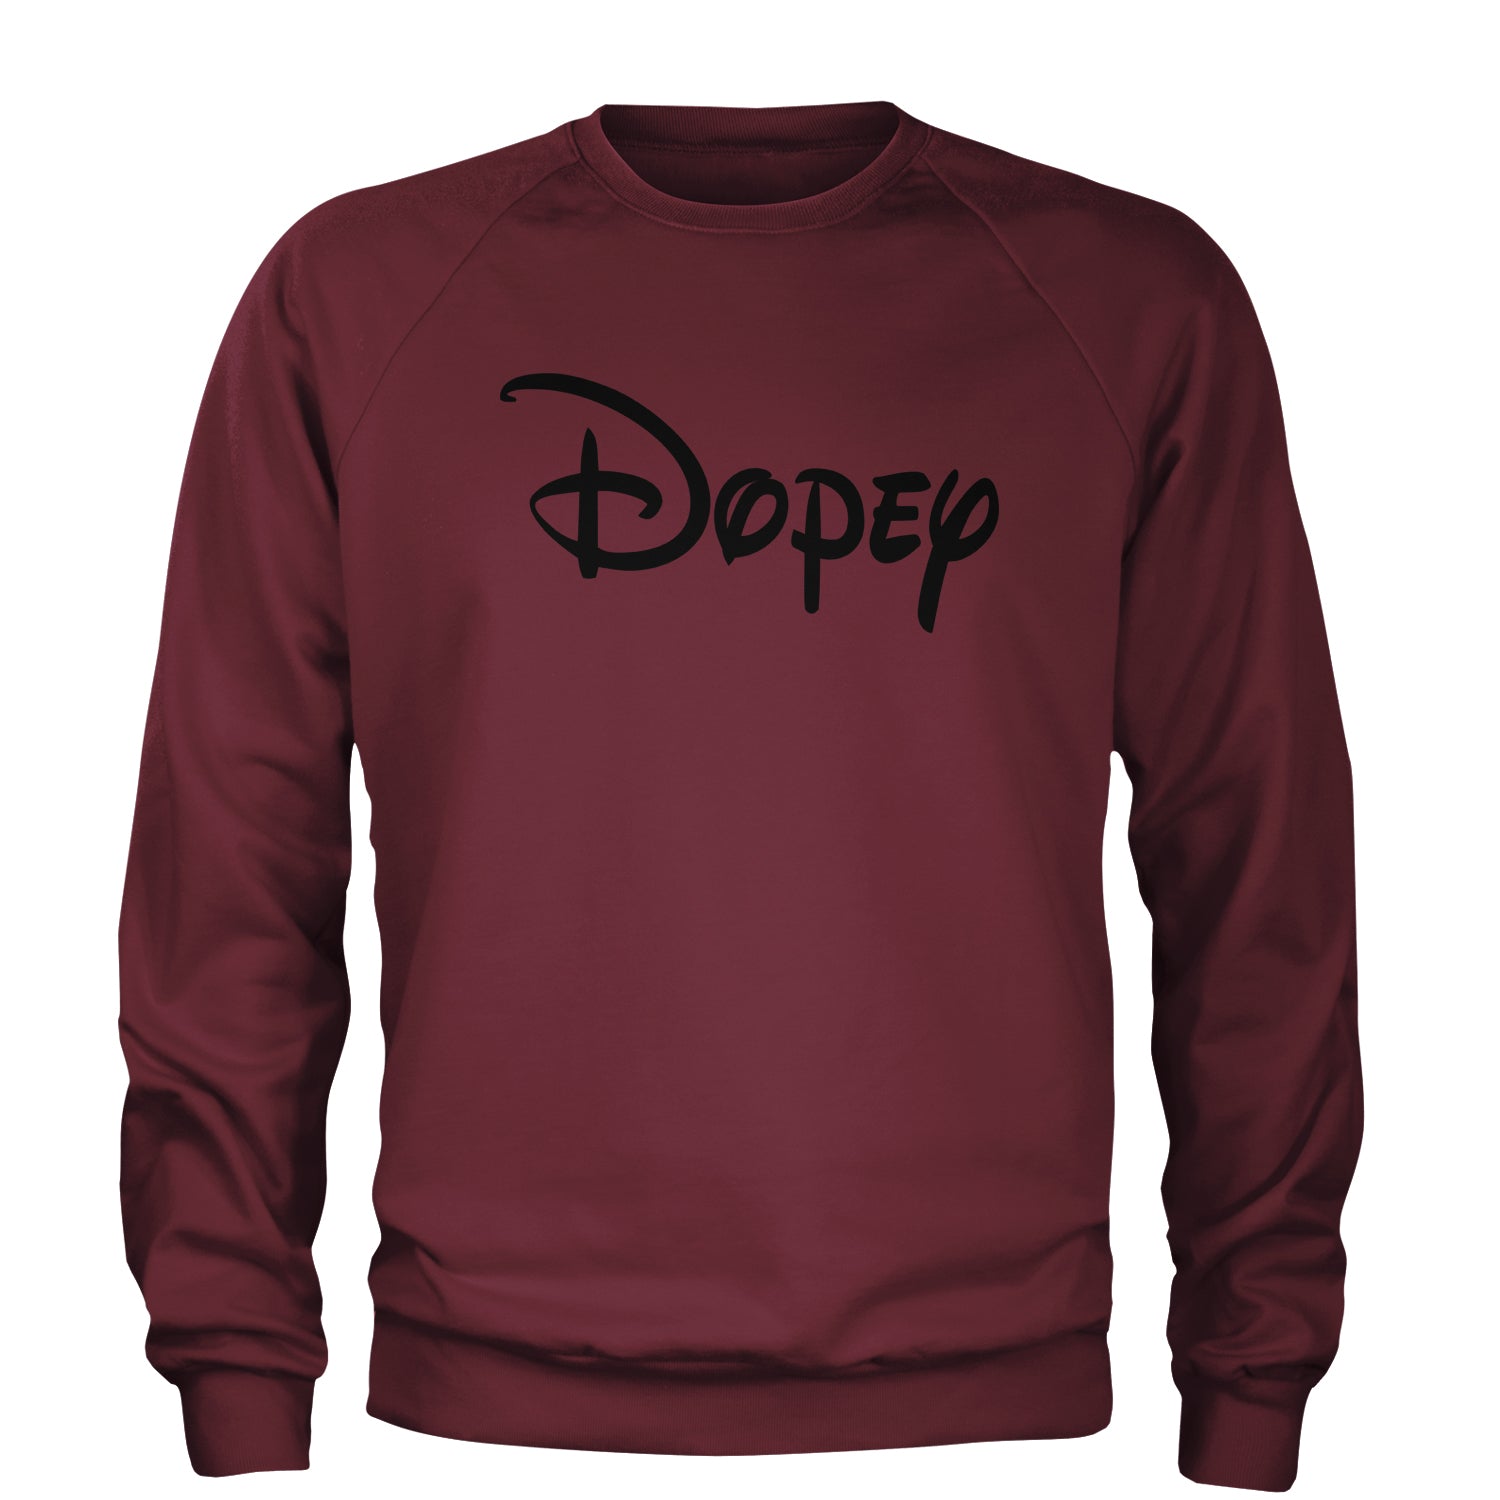 Dopey - 7 Dwarfs Costume Adult Crewneck Sweatshirt and, costume, dwarfs, group, halloween, matching, seven, snow, the, white by Expression Tees